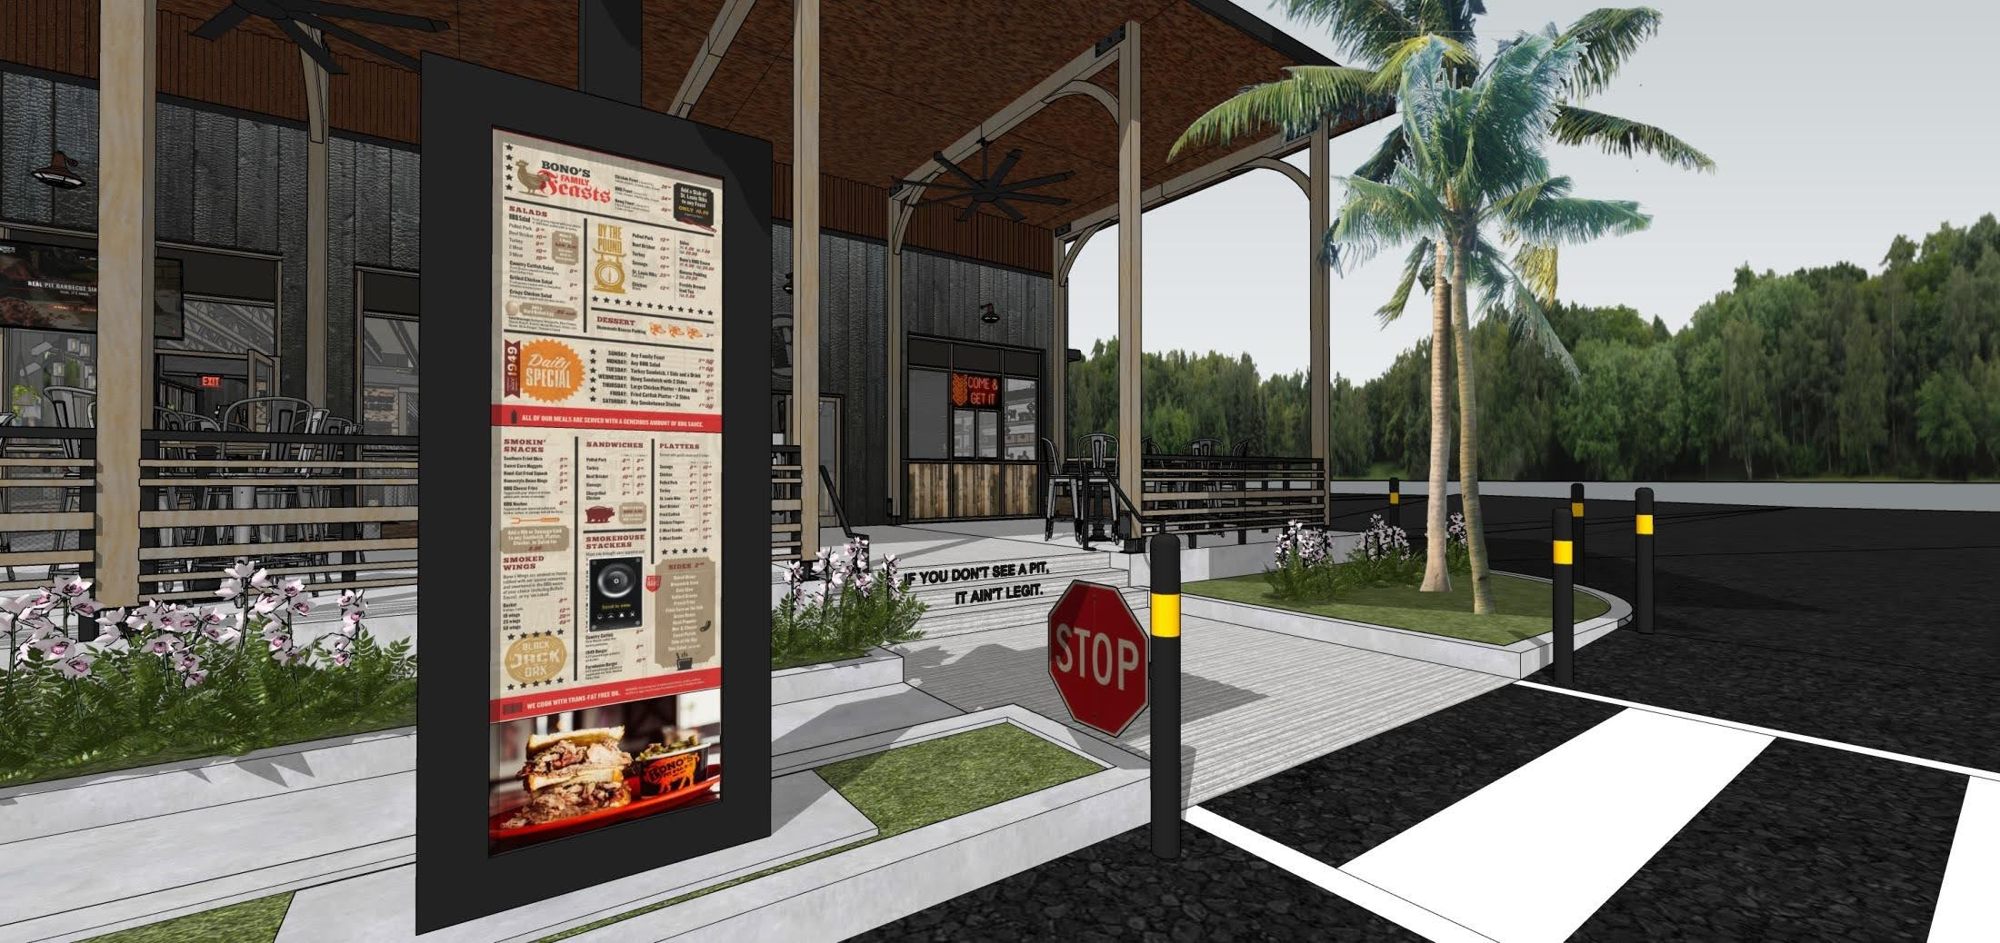 The Town Center Bono's will have a drive-thru.